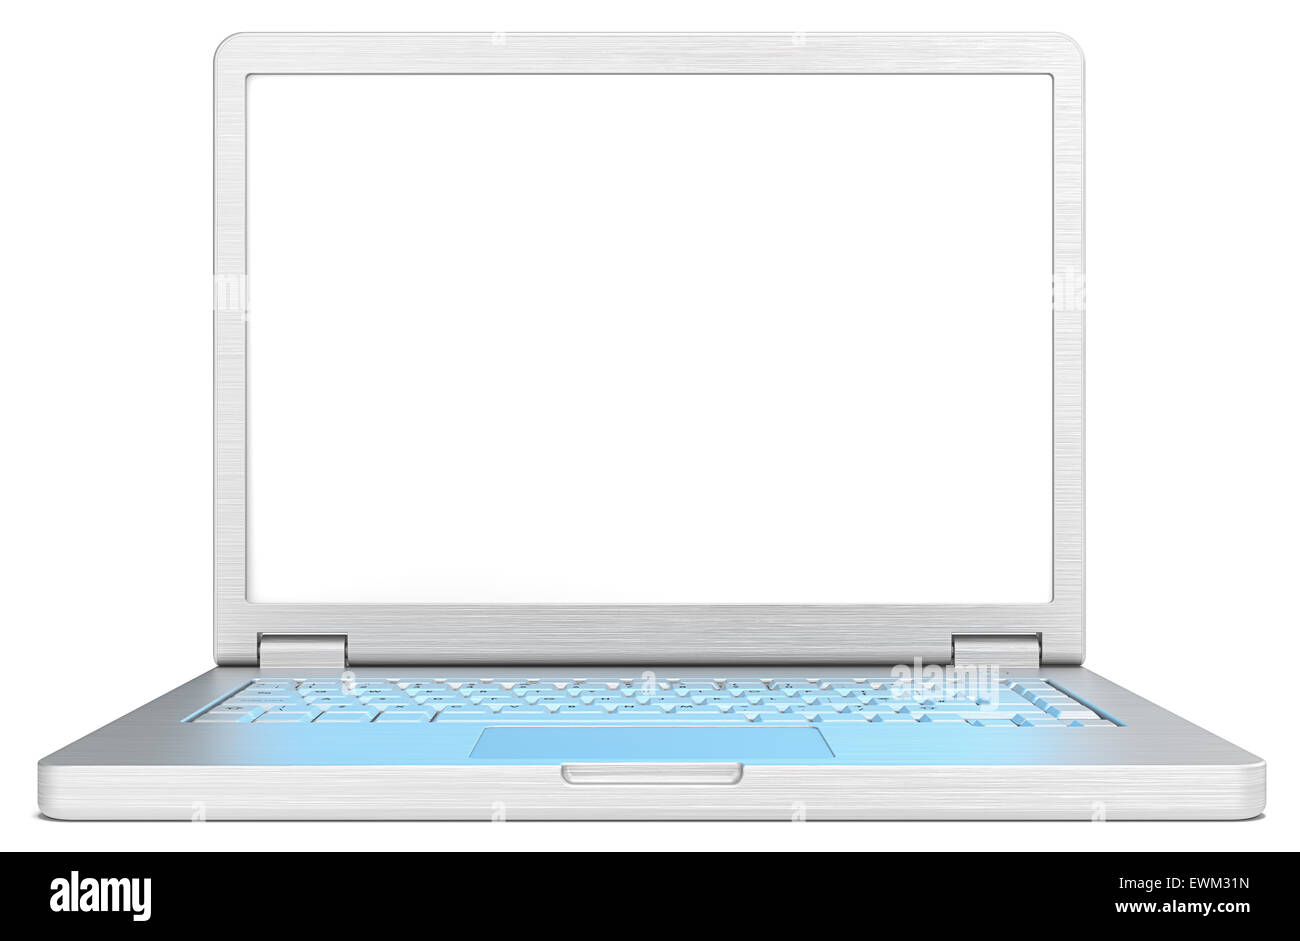 Laptop of brushed steel. No branded. Blank screen for copy space. Realistic blue light reflection on keyboard. Stock Photo